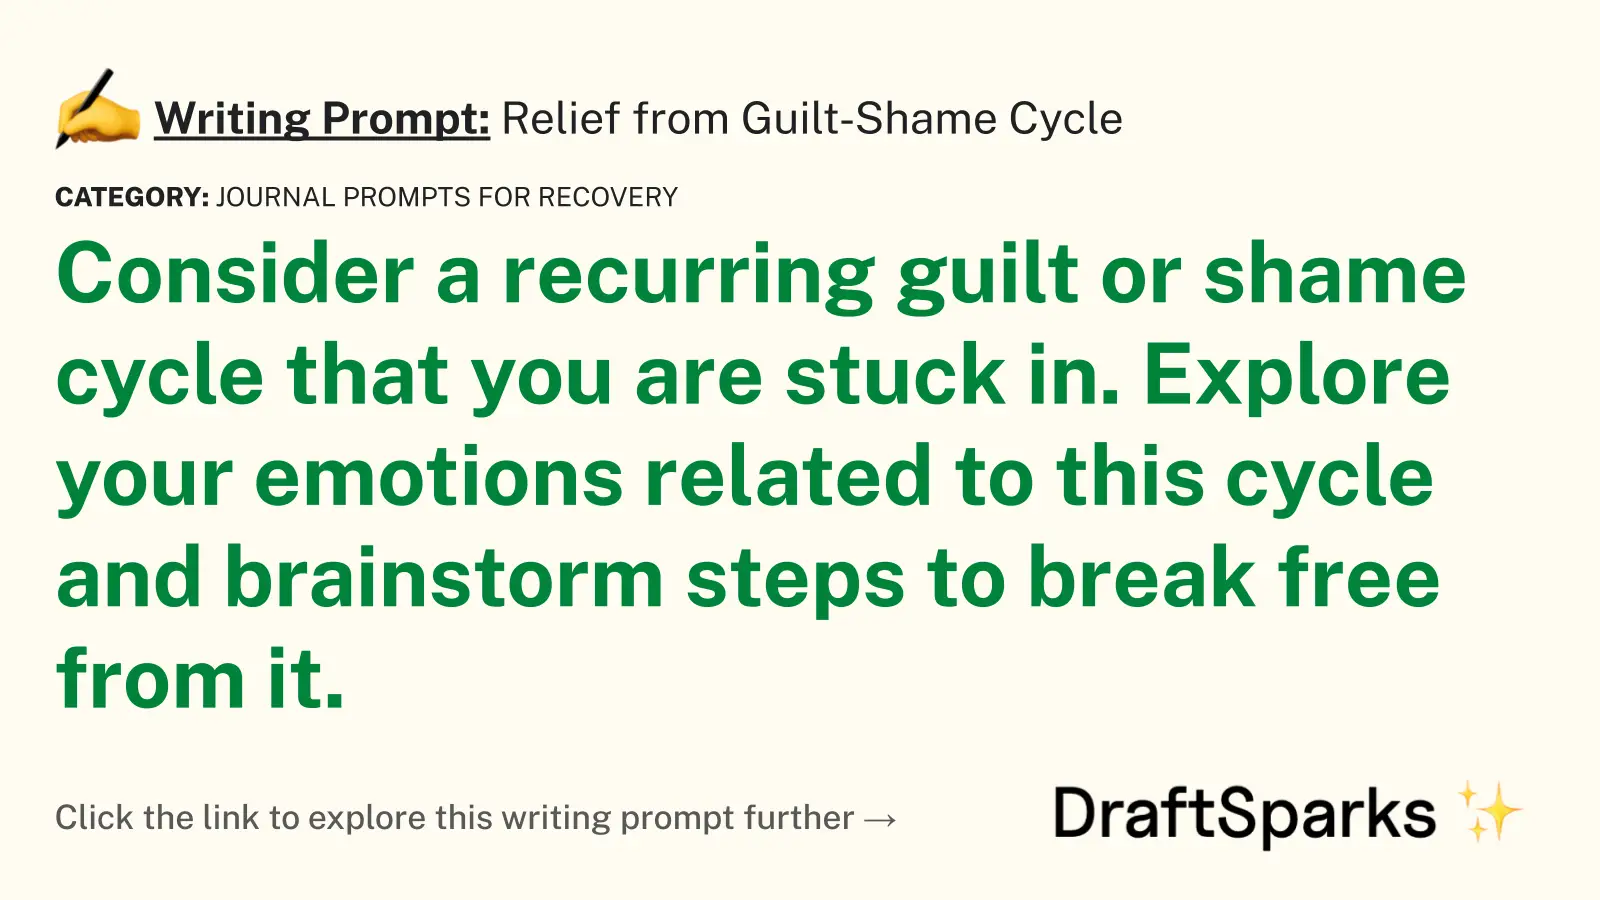 Relief from Guilt-Shame Cycle